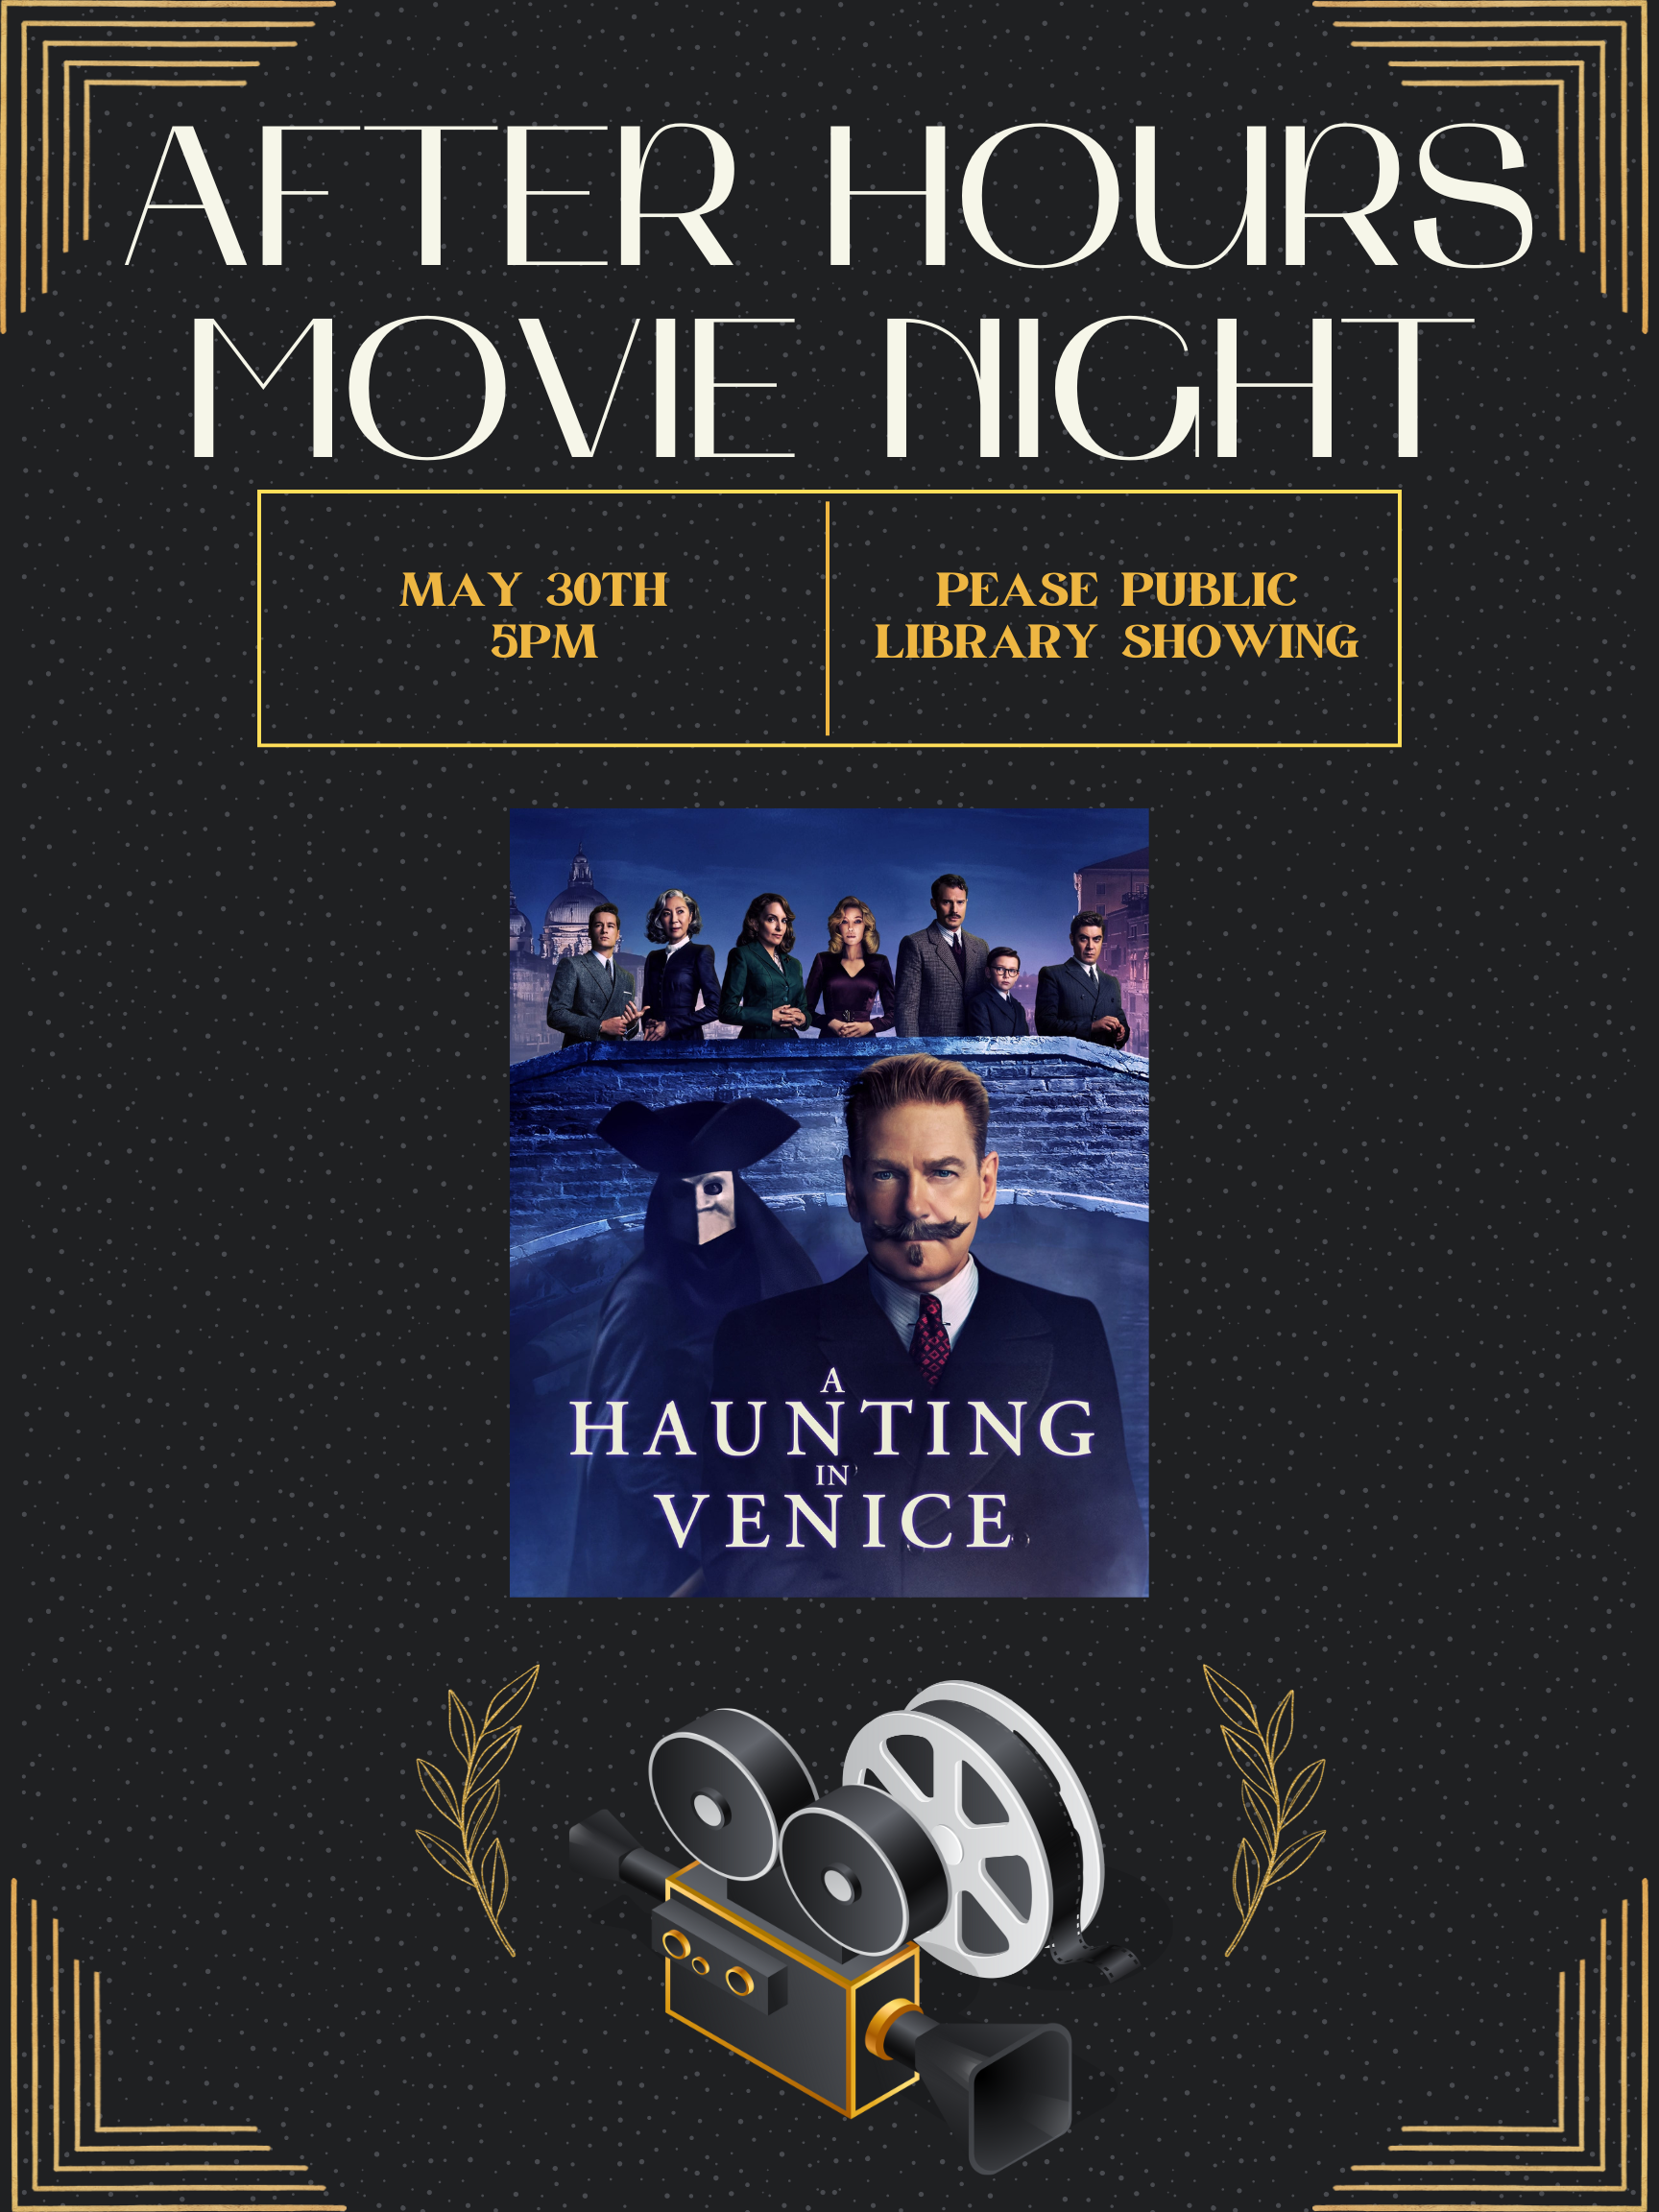 We will be watching A Haunting in Venice.